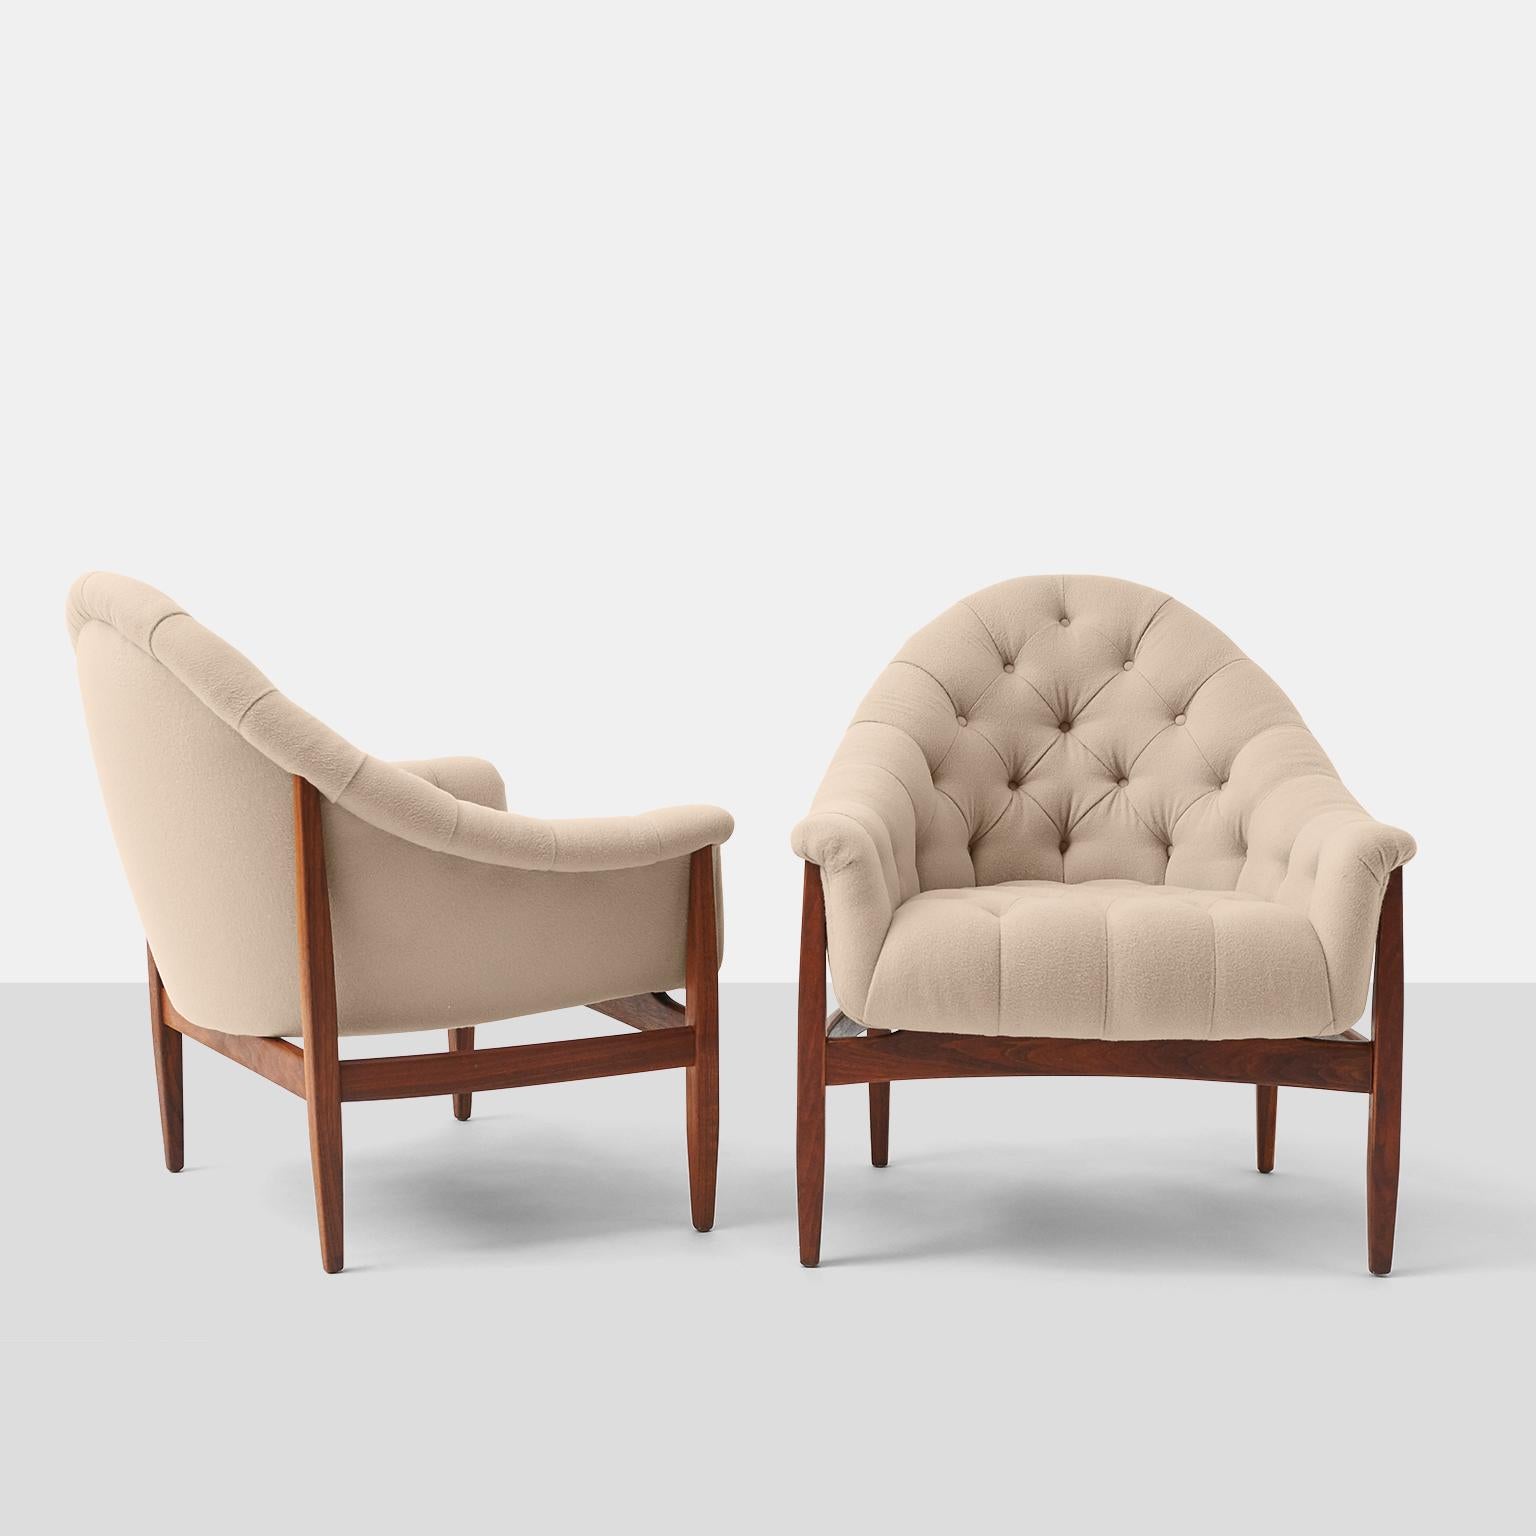 Tufted tub chairs by Milo Baughman for Thayer Coggin. A rare, early style that marked the beginning of their long collaboration. Walnut frames support low scoop seating.
Recently restored and upholstered in pure natural Sandra Jordan Prima